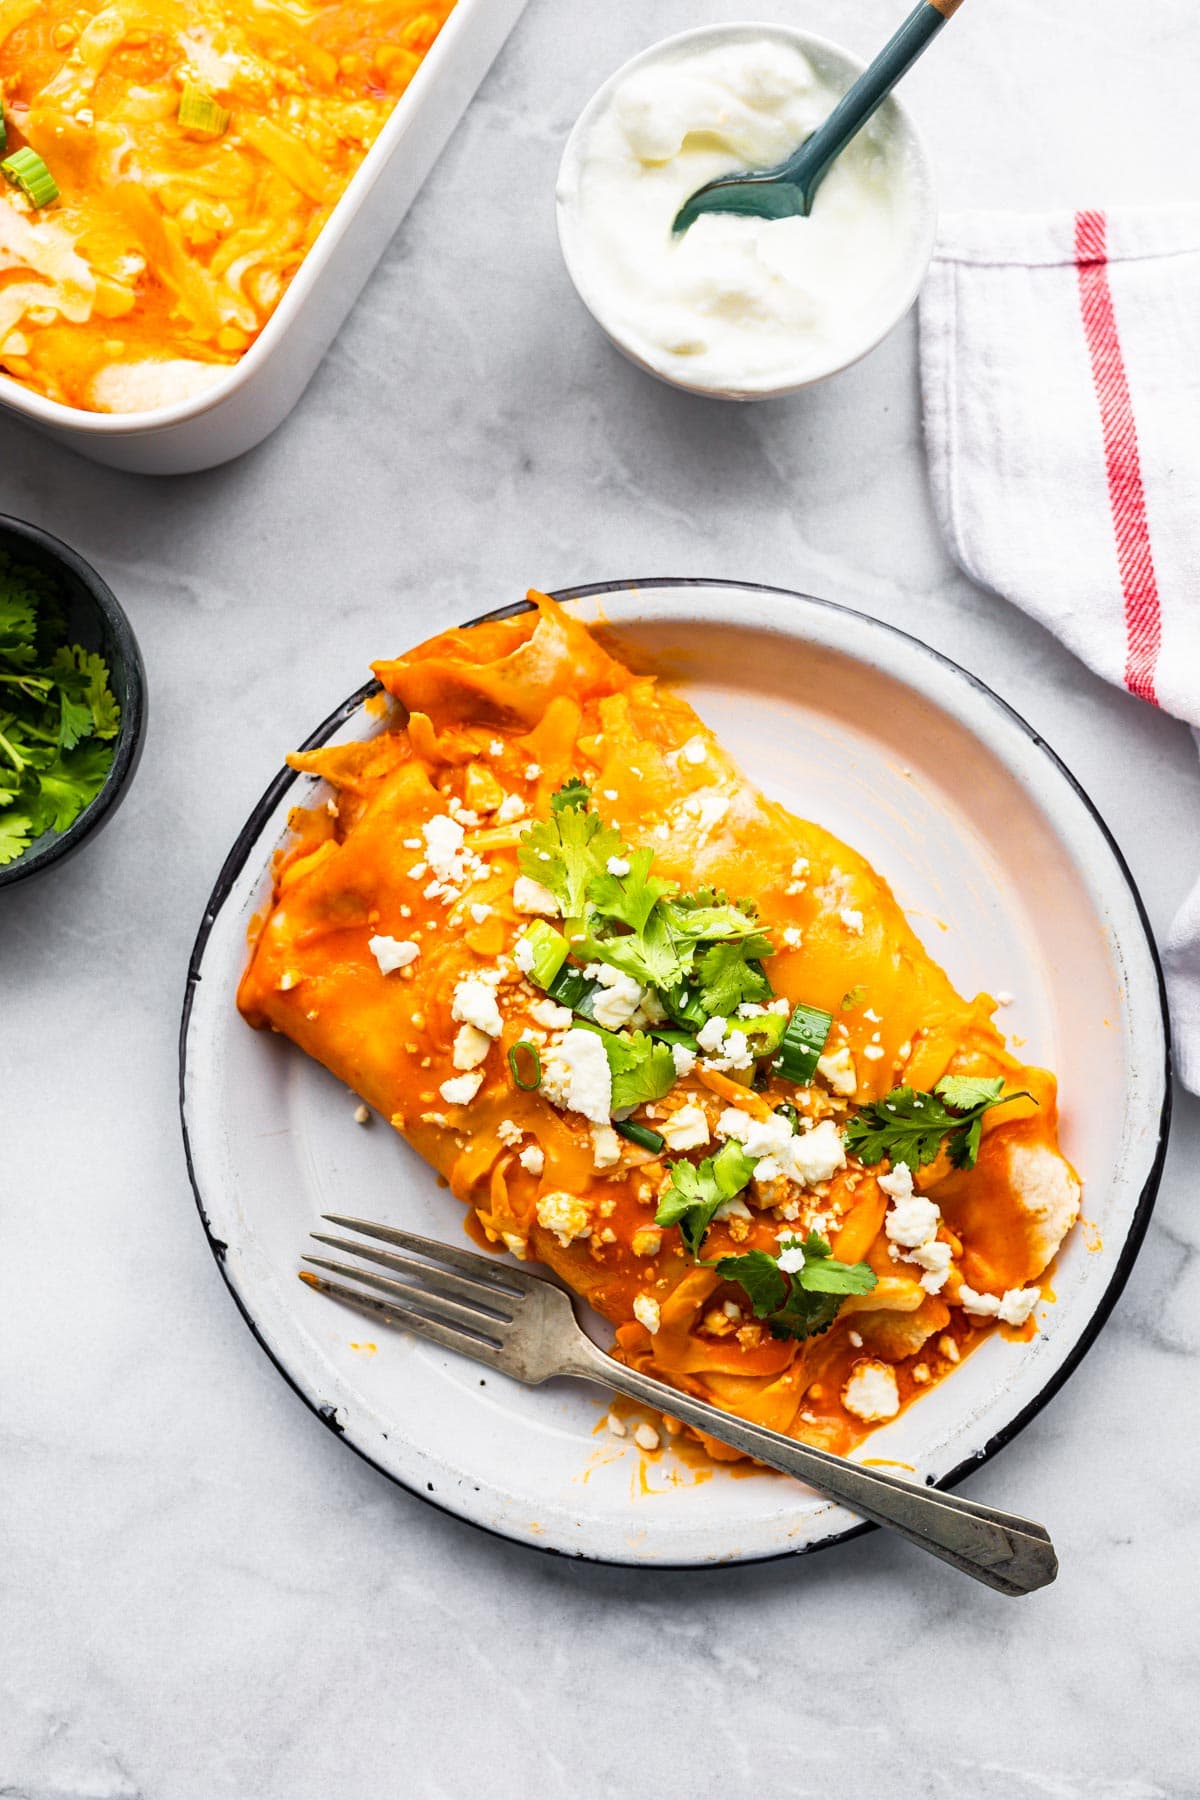 buffalo style enchiladas on plate topped with fresh cilantro with fork on the side.